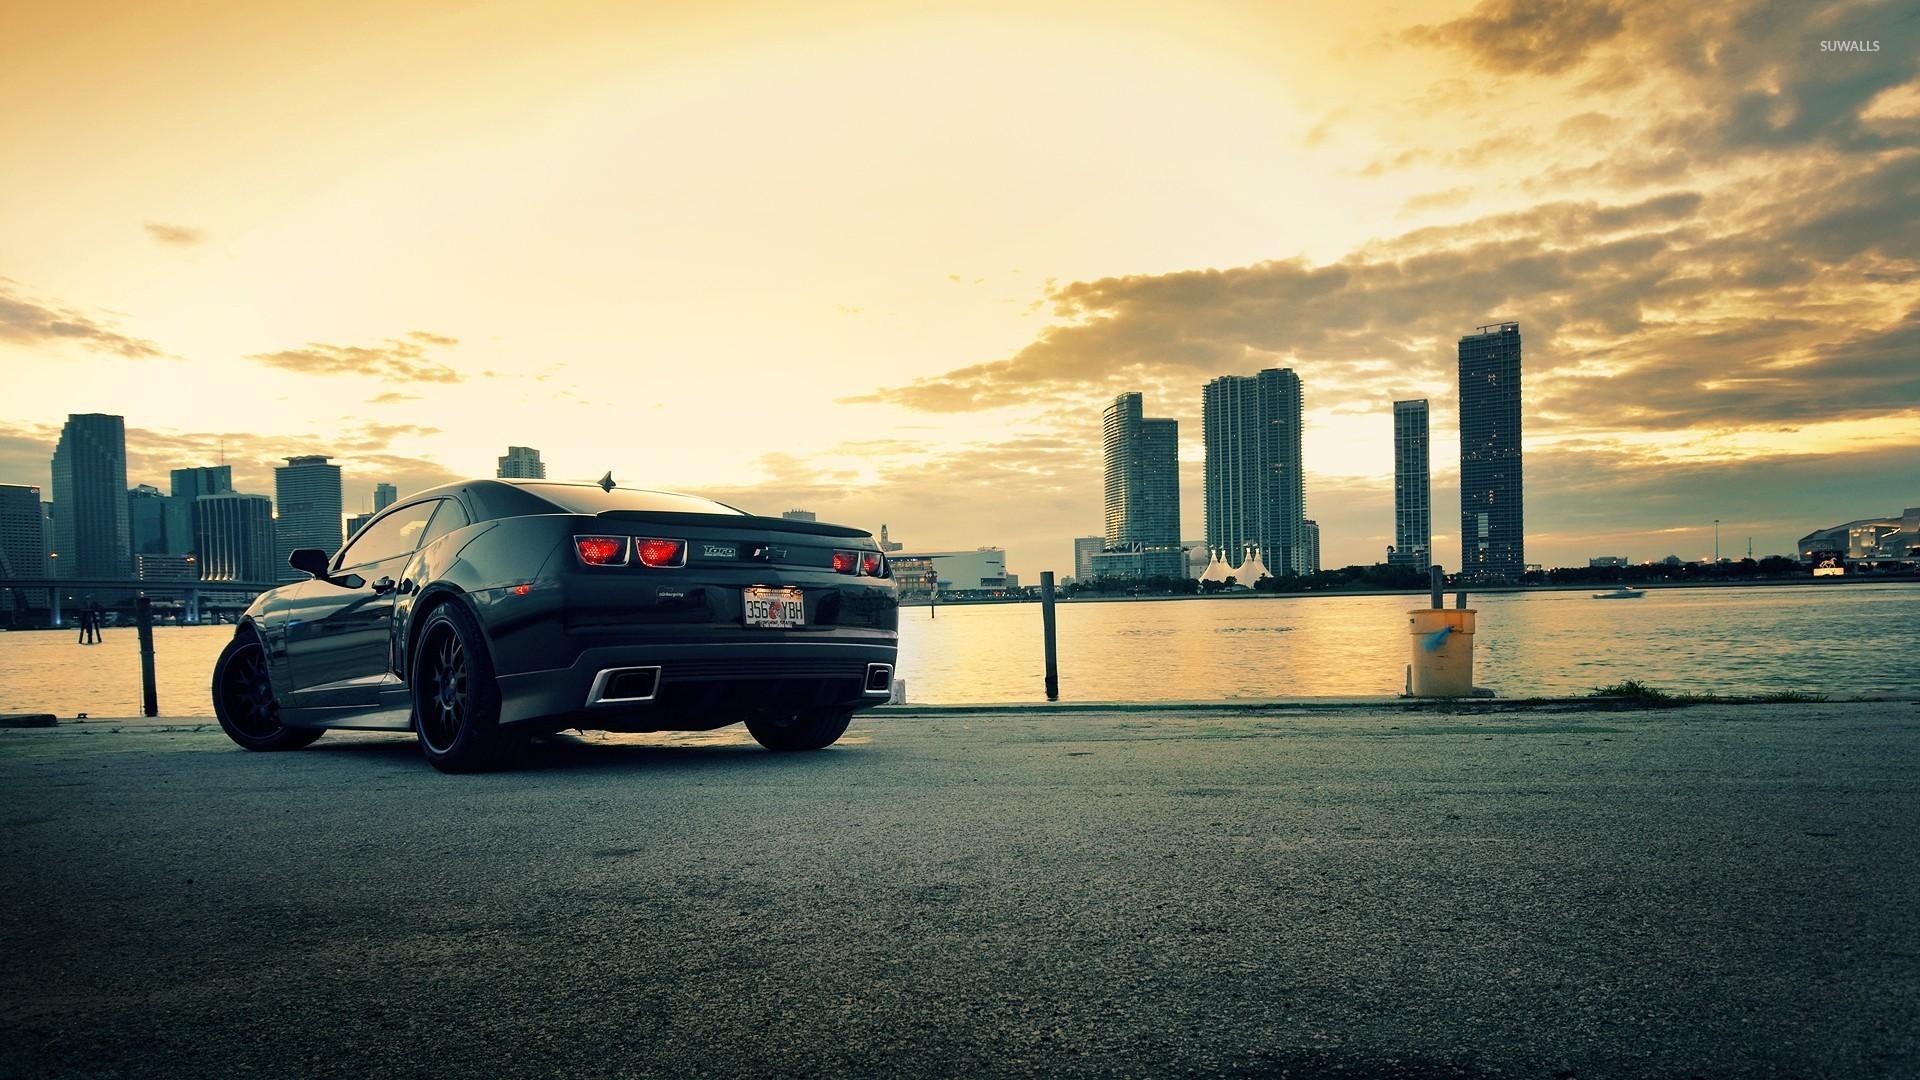 Back side view of a Chevrolet Camaro at sunset wallpaper